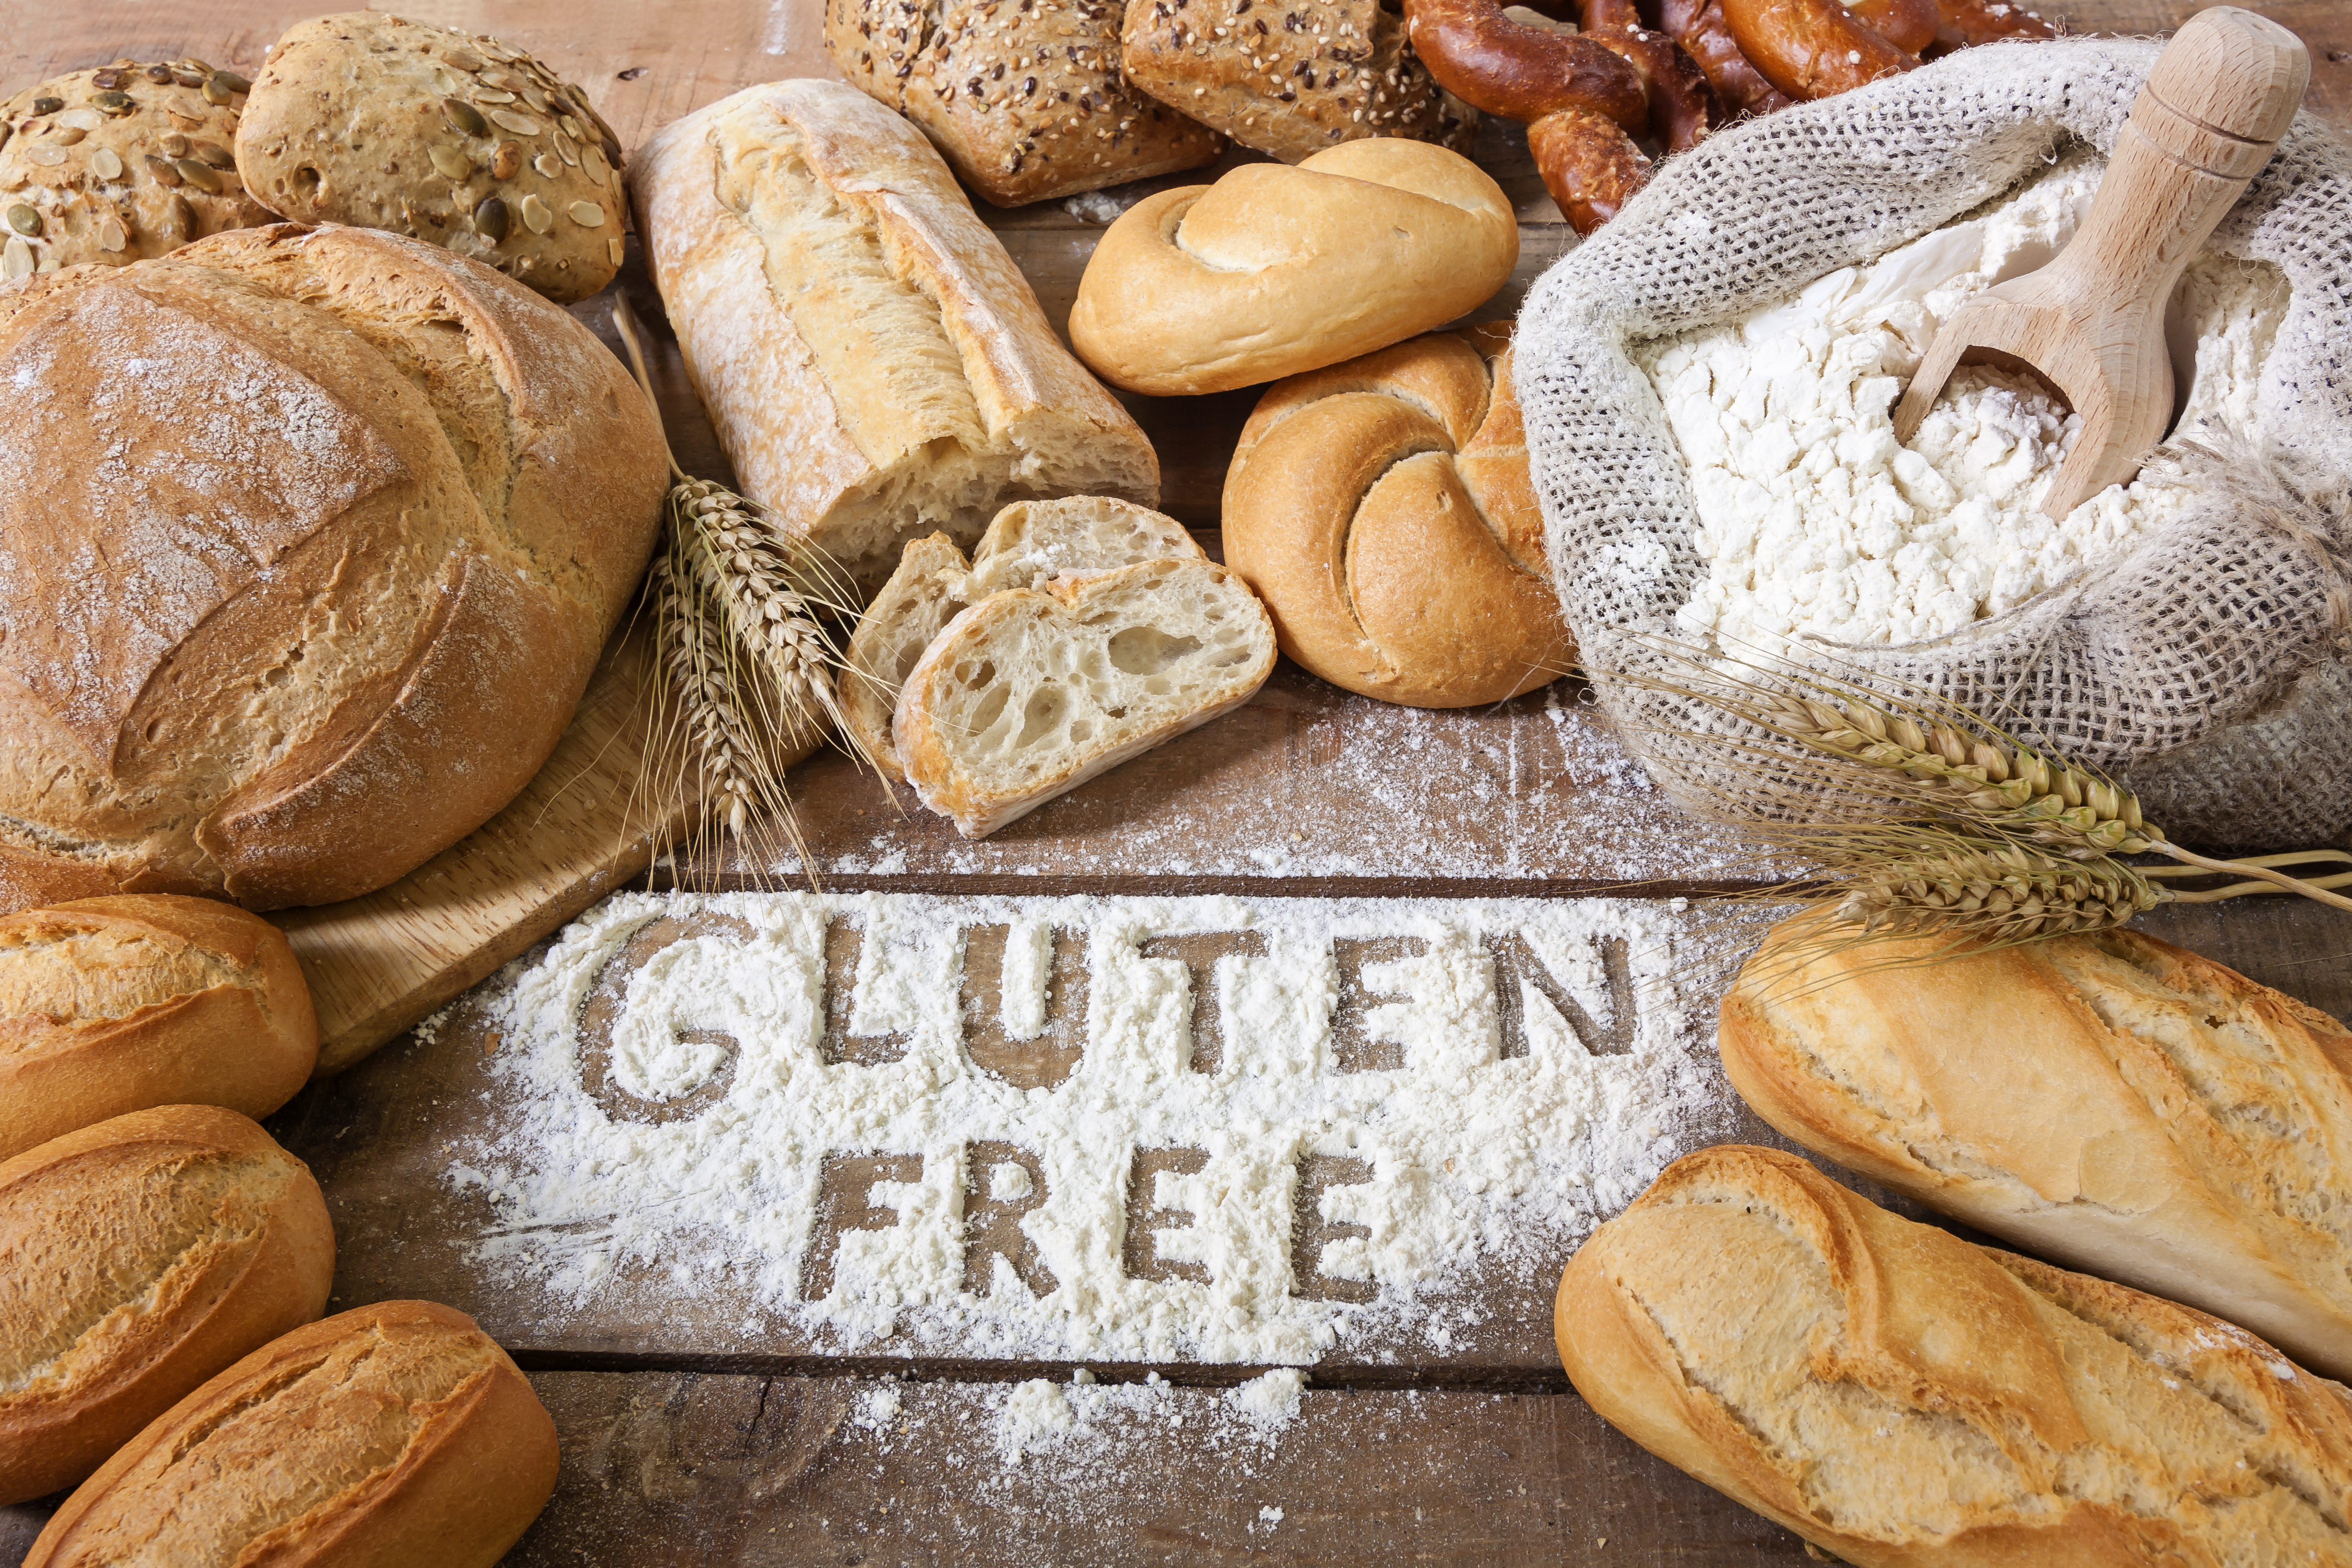 Demystifying the Gluten-Free Diet: Is It Actually Healthier?